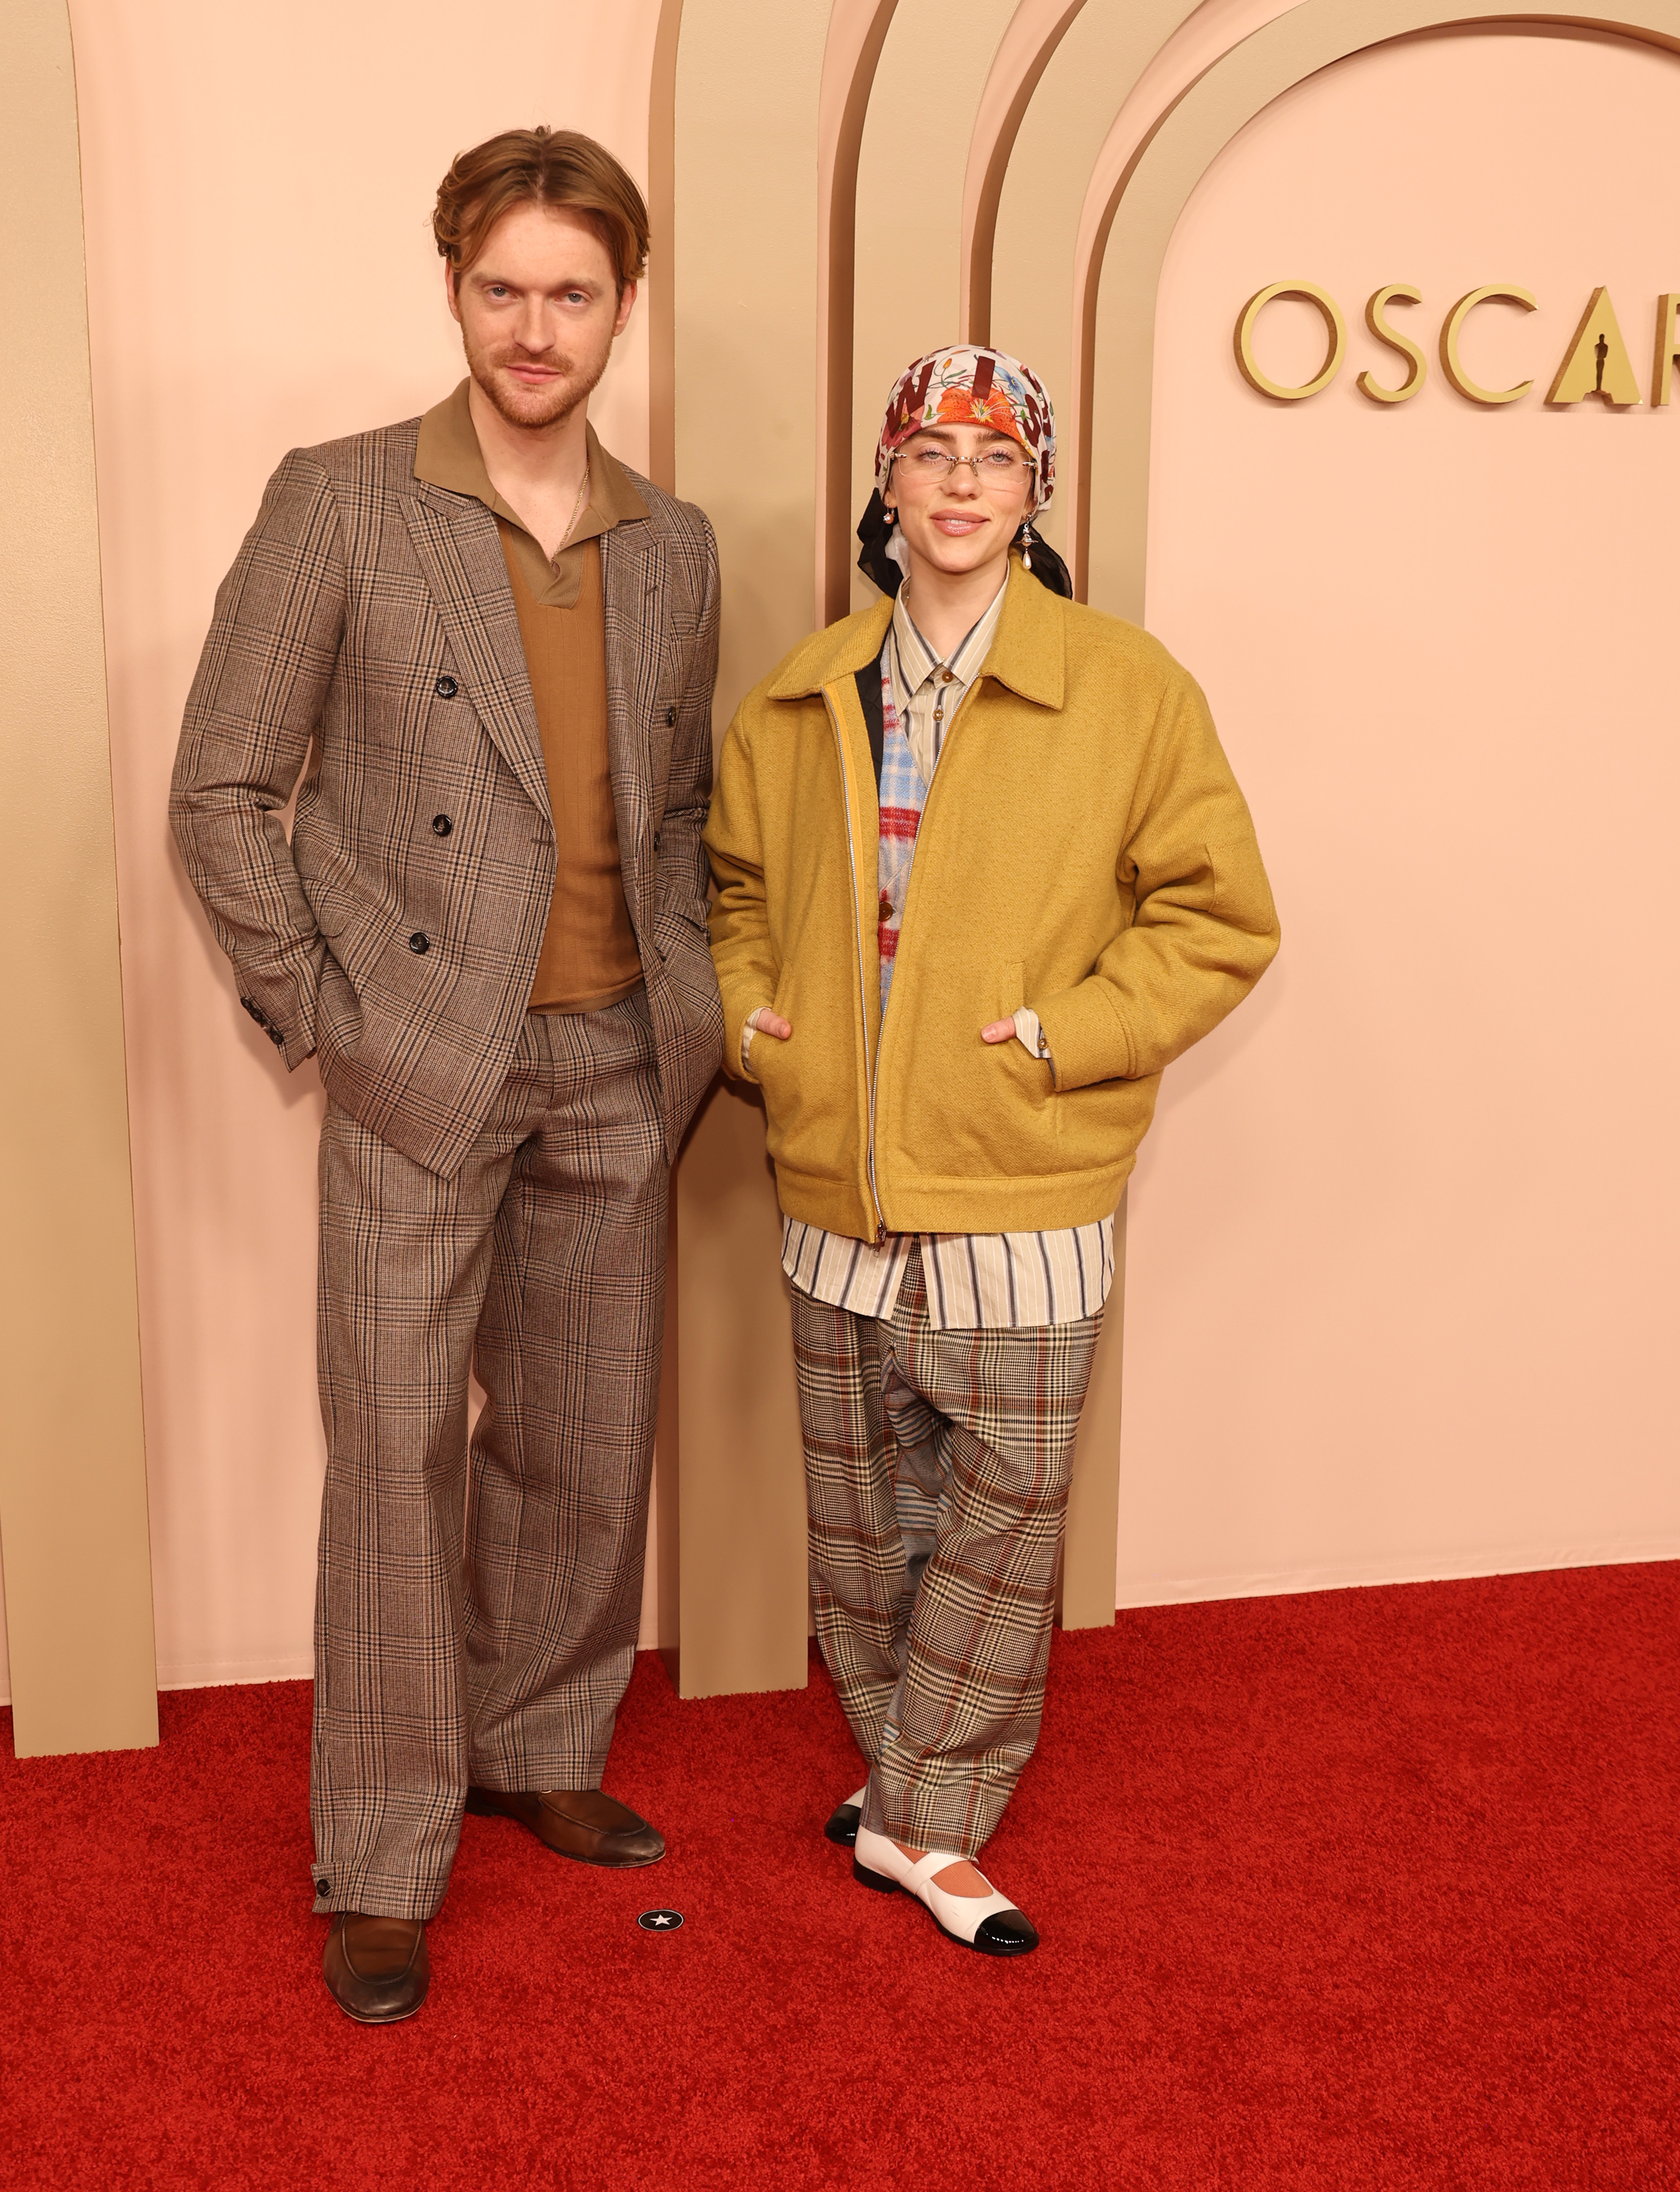 Finneas and Billie standing in front of an &quot;OSCARS&quot; backdrop. Finneas is wearing a checked suit